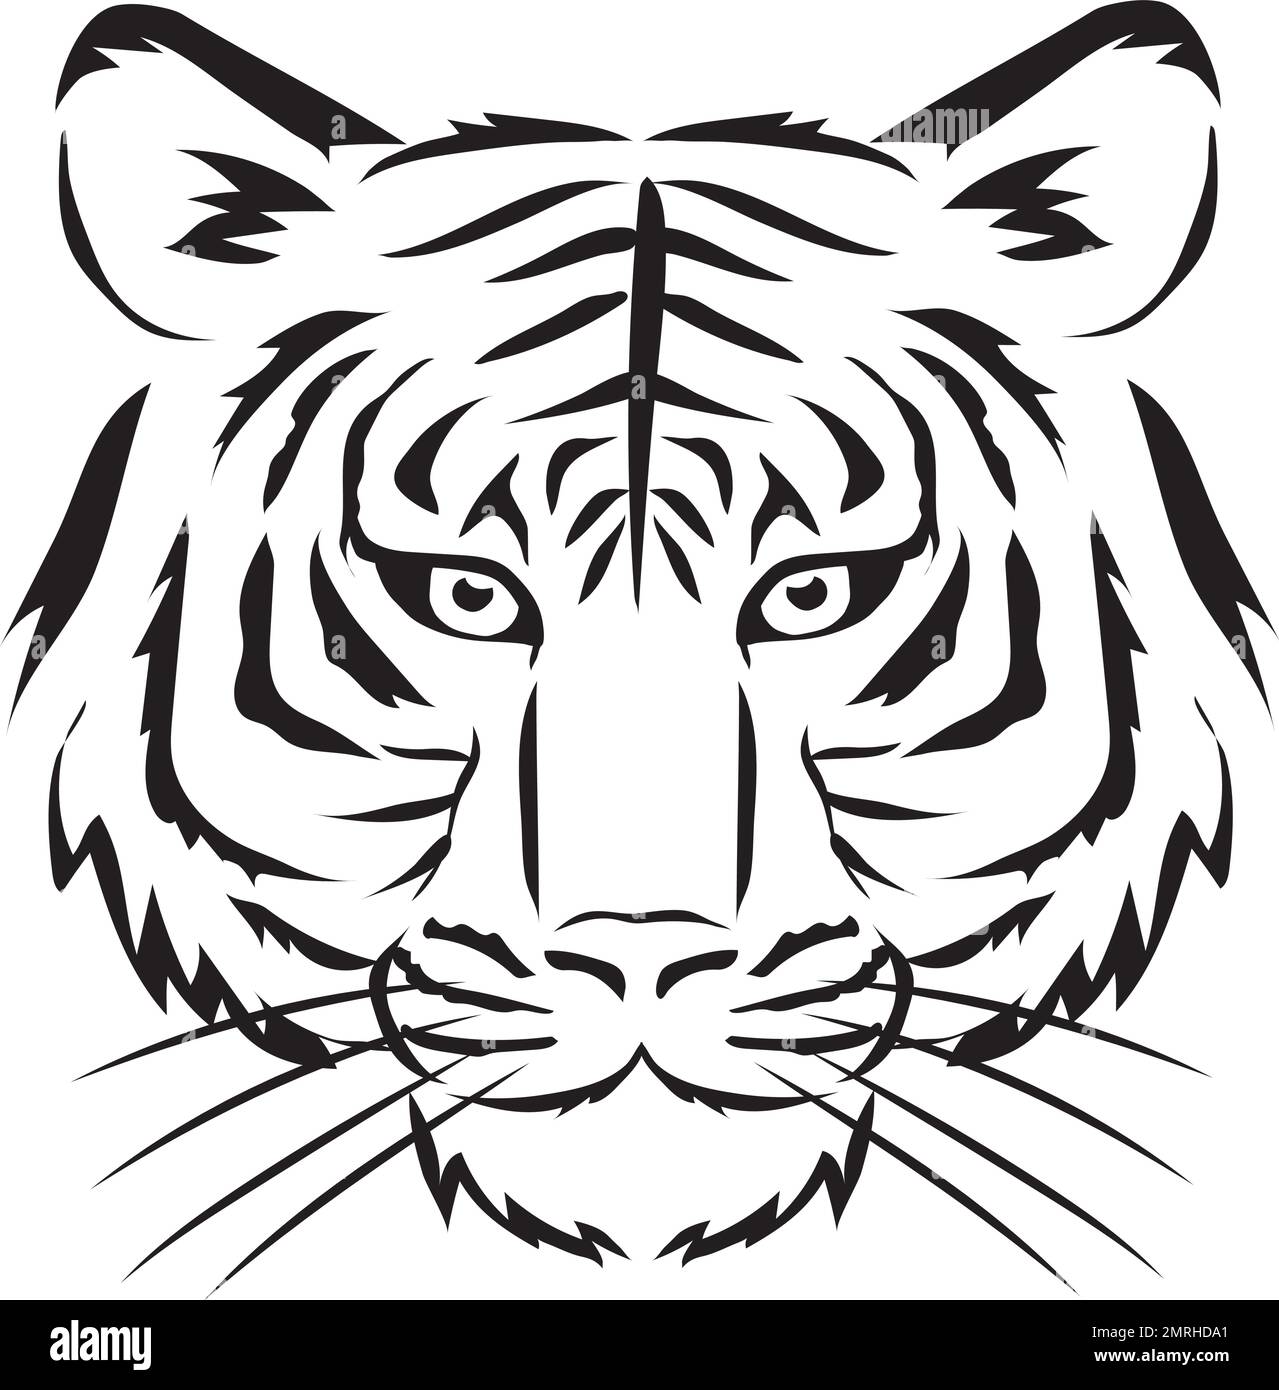 Vector illustration of a tiger's face facing forward. Black and white ...